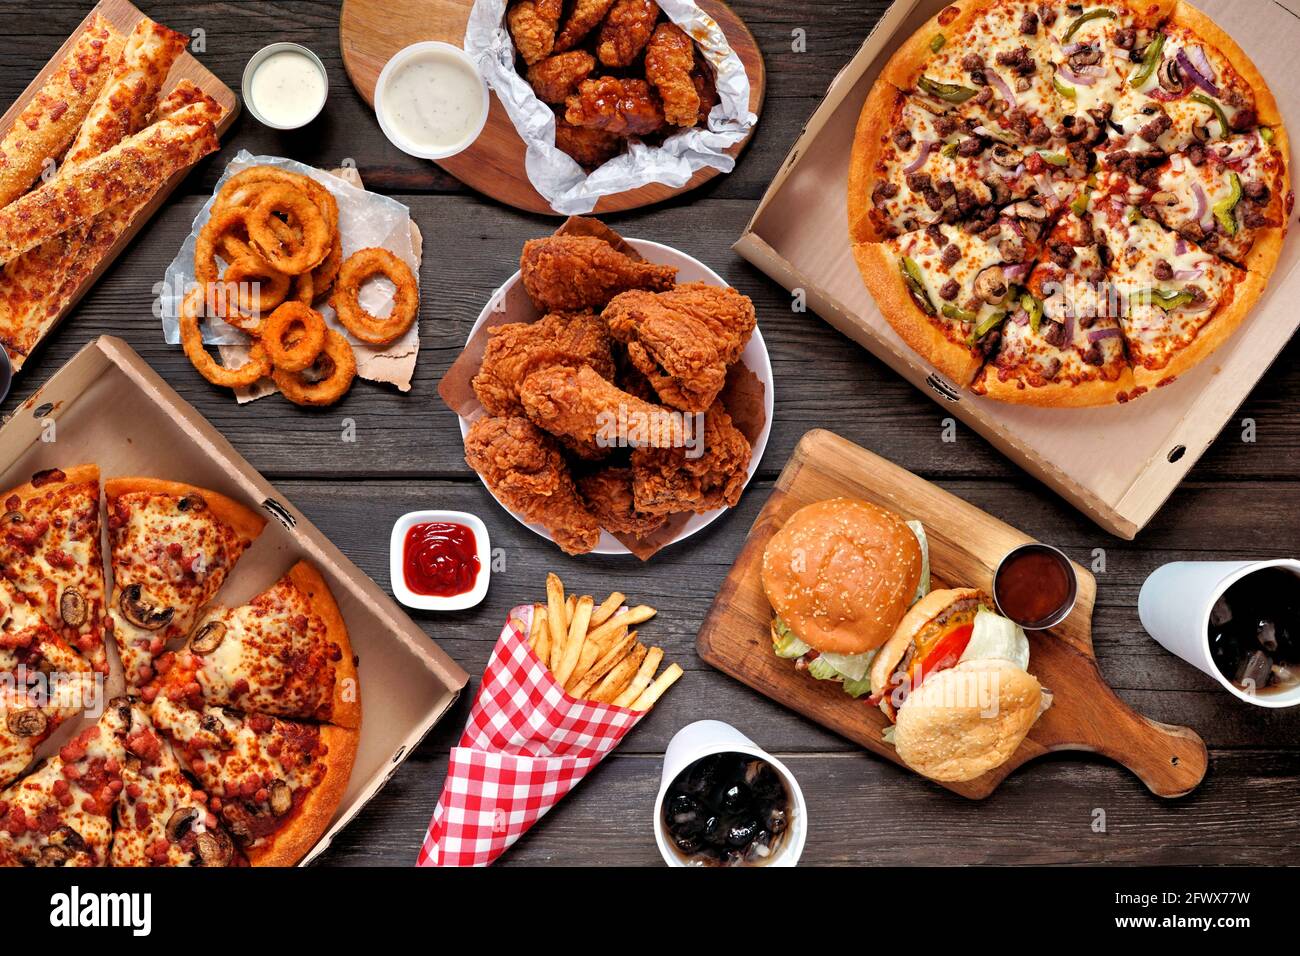 Buffet table scene of take out or delivery foods. Pizza, hamburgers, fried  chicken and sides. Above view on a dark wood background Stock Photo - Alamy